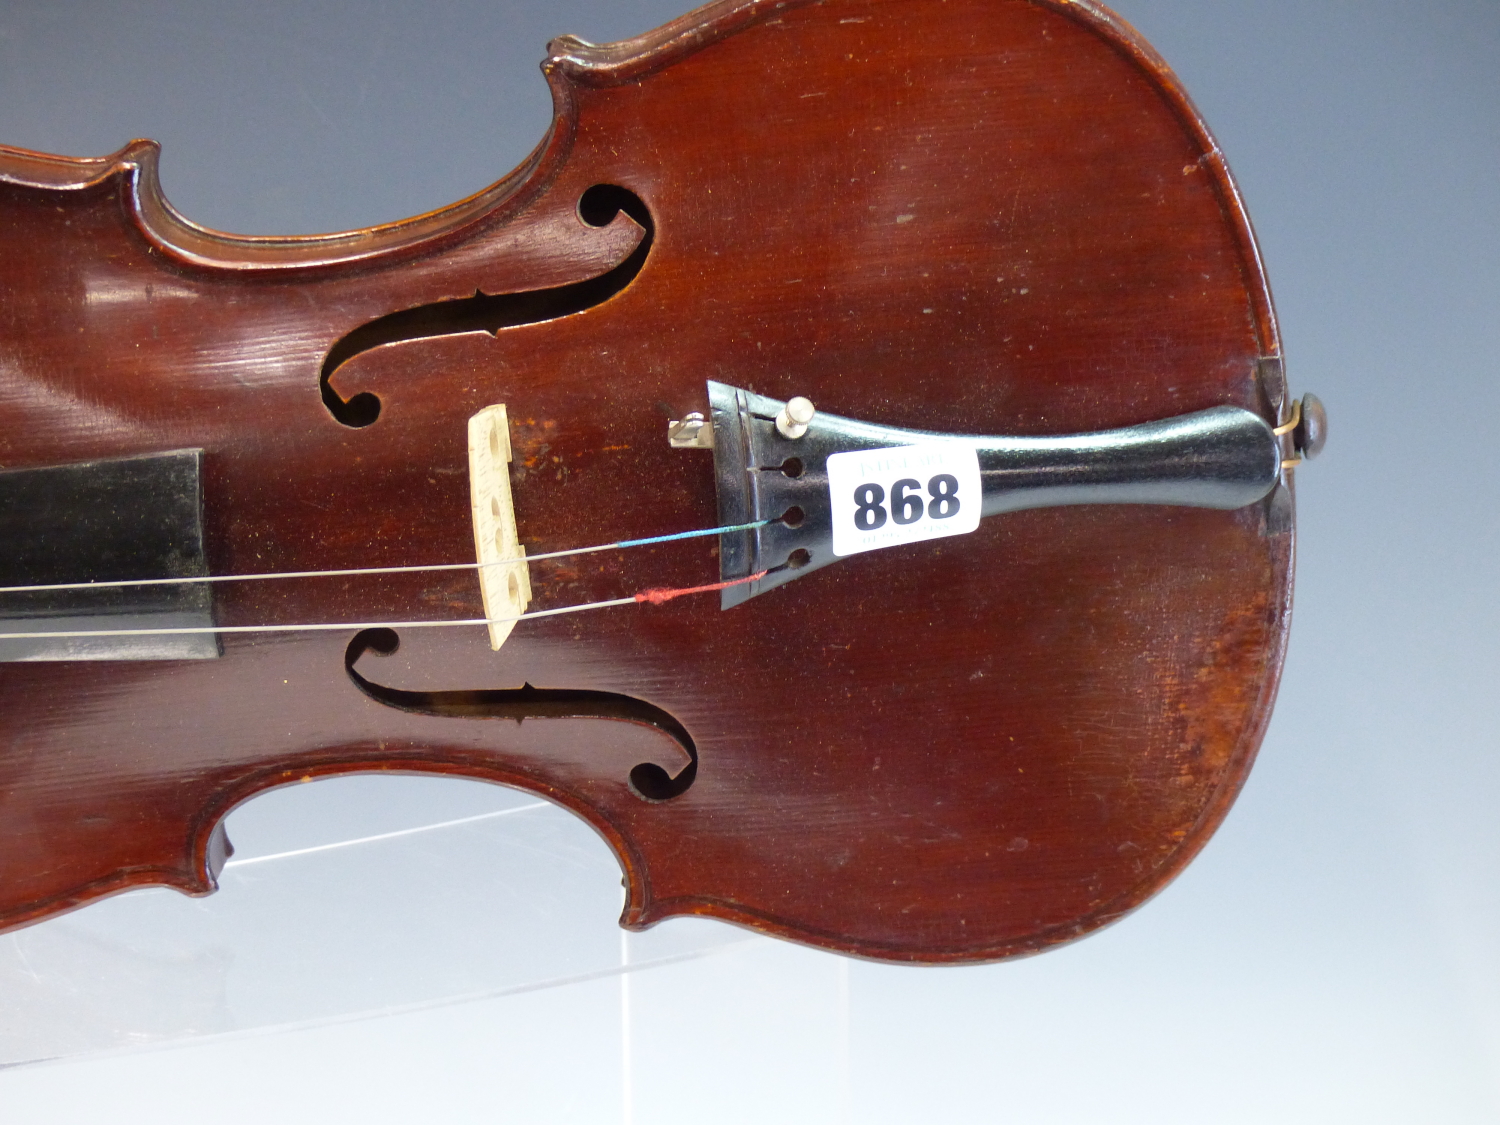 A 20TH CENTURY VIOLIN WITH LABEL " ANTONIUS STRADIUARIUS CREMONENSIS". CASED WITH A SILVER PLATE - Image 2 of 19